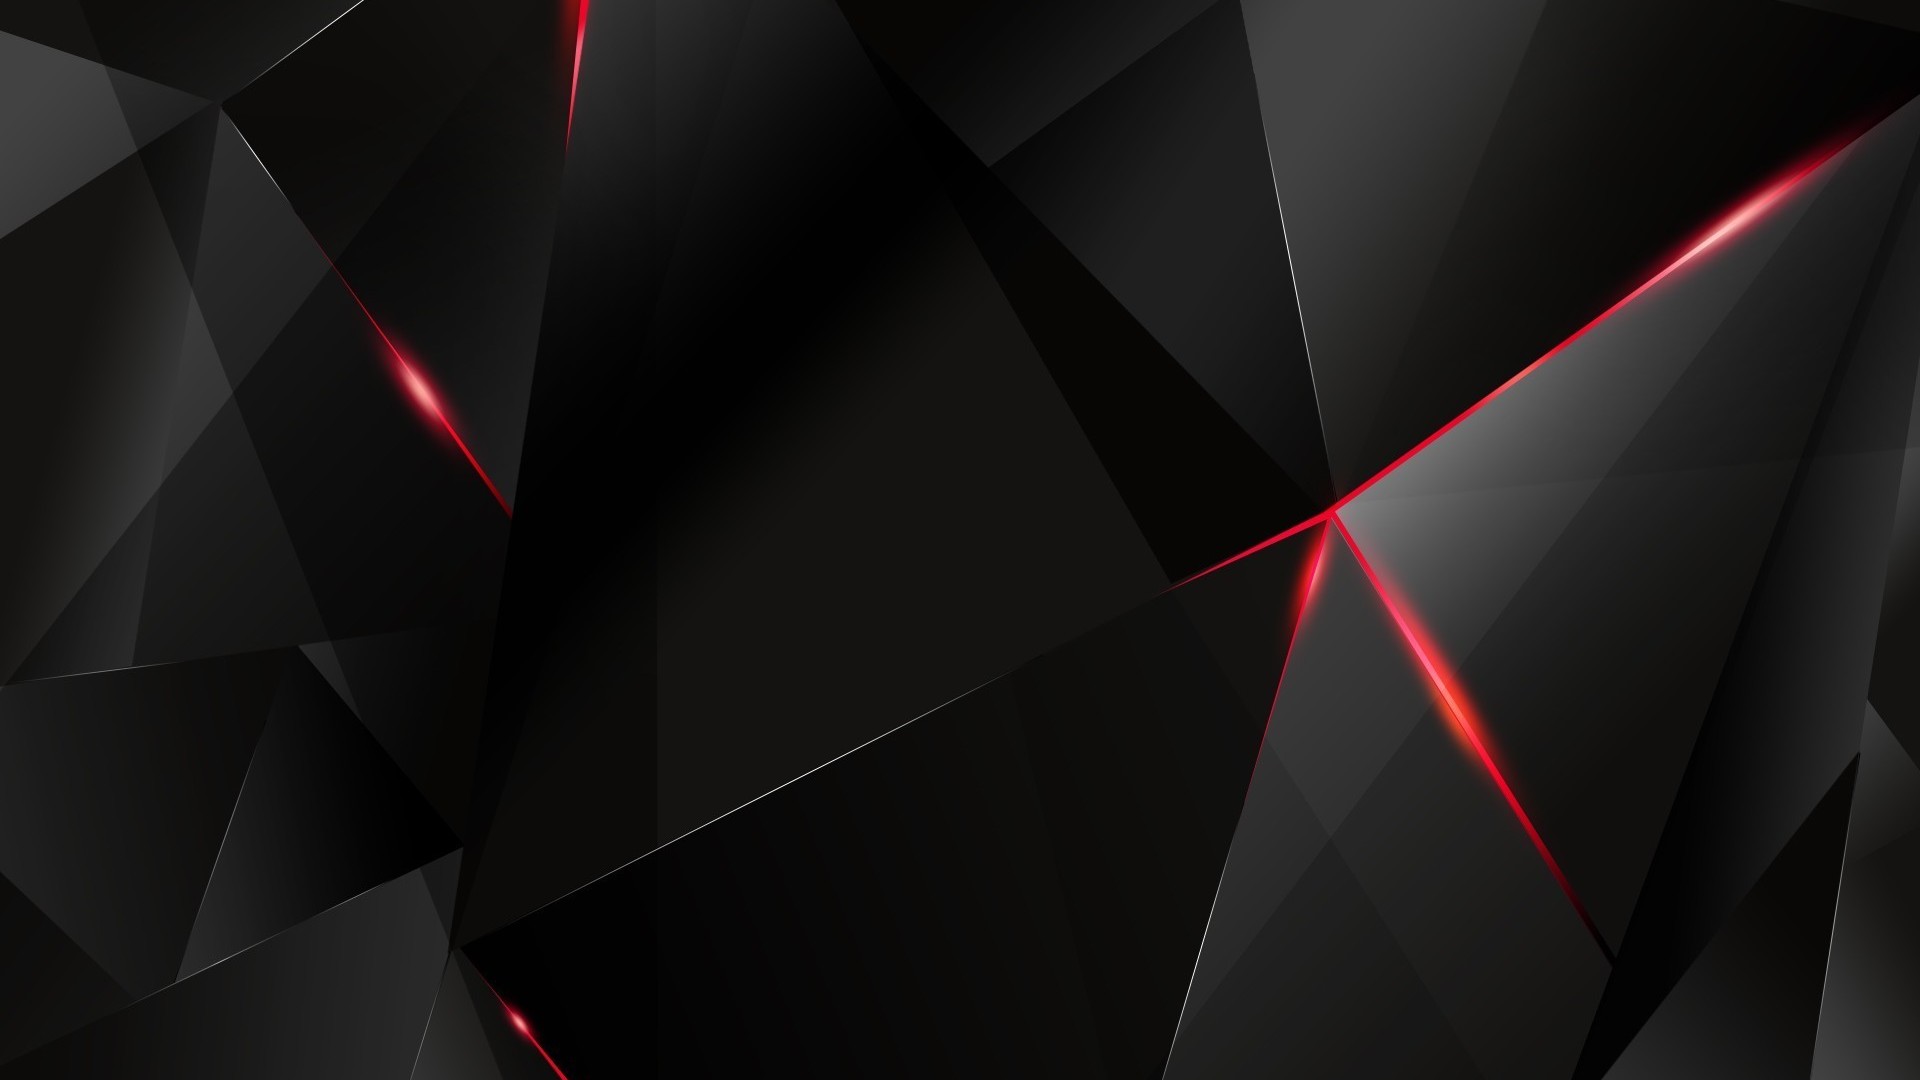 Black and Red HD Wallpaper With high-resolution 1920X1080 pixel. You can use this wallpaper for your Desktop Computer Backgrounds, Mac Wallpapers, Android Lock screen or iPhone Screensavers and another smartphone device